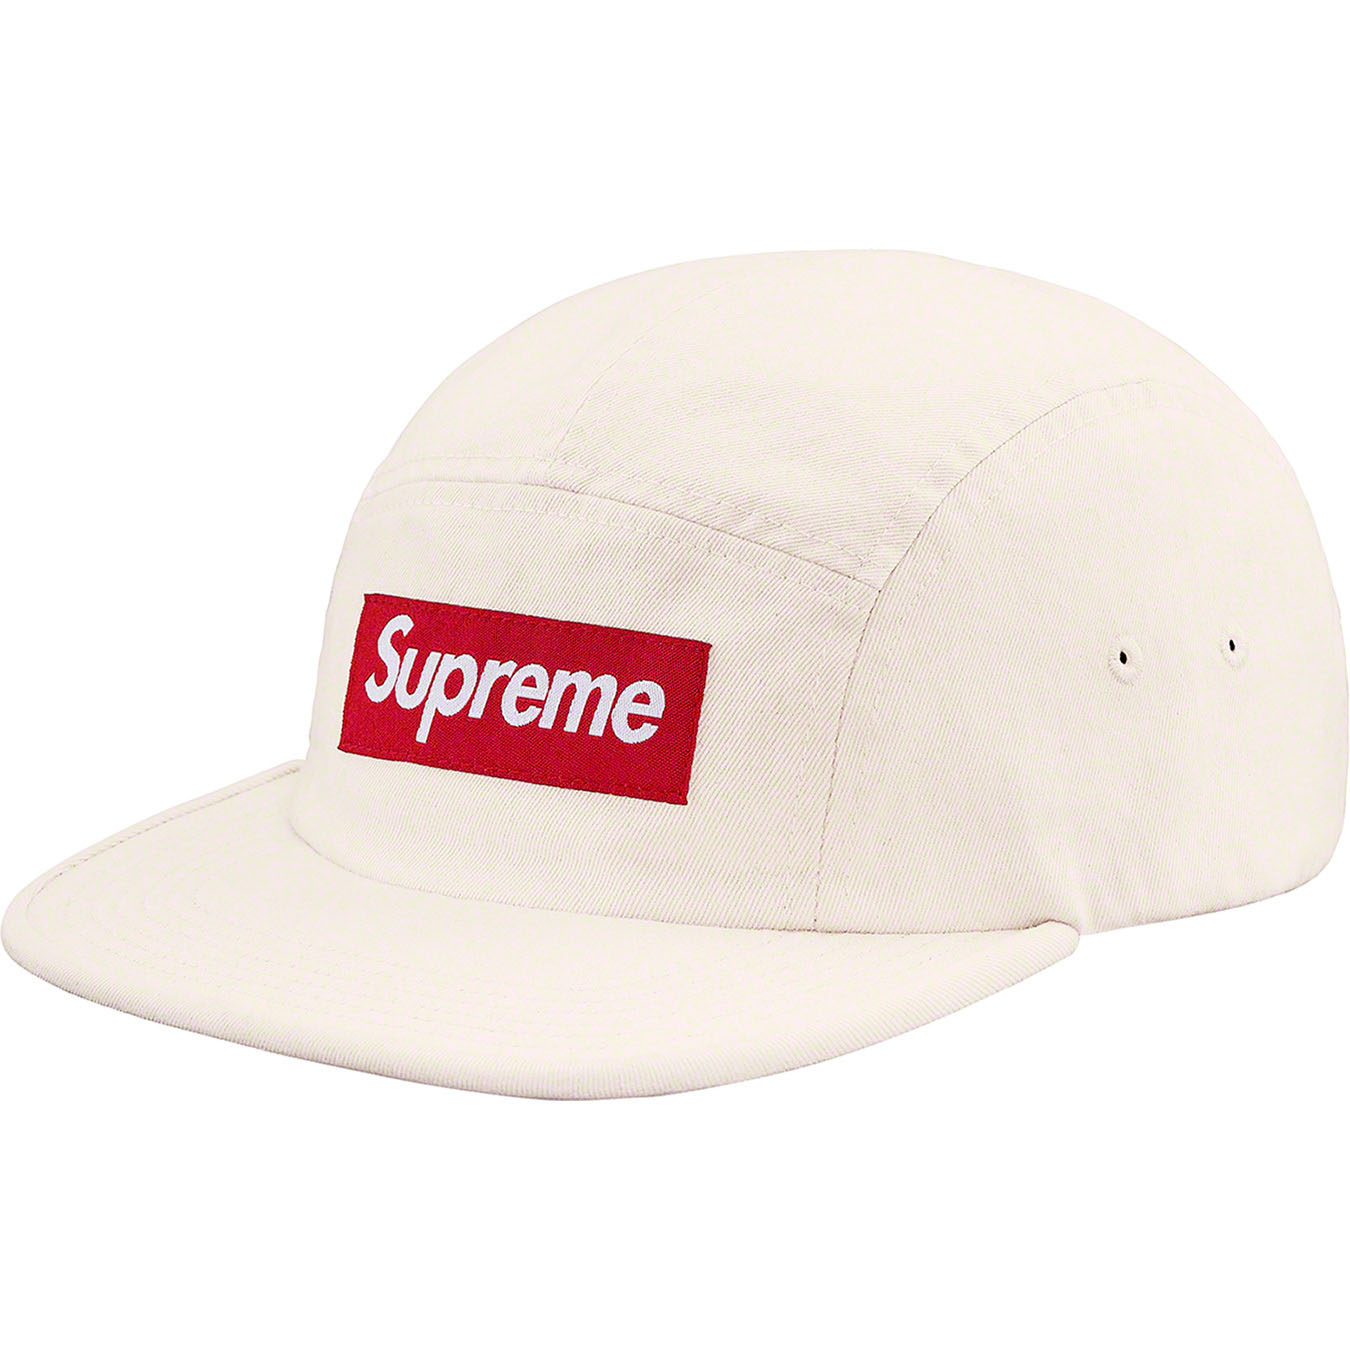 Washed Chino Twill Camp Cap | Supreme 19ss